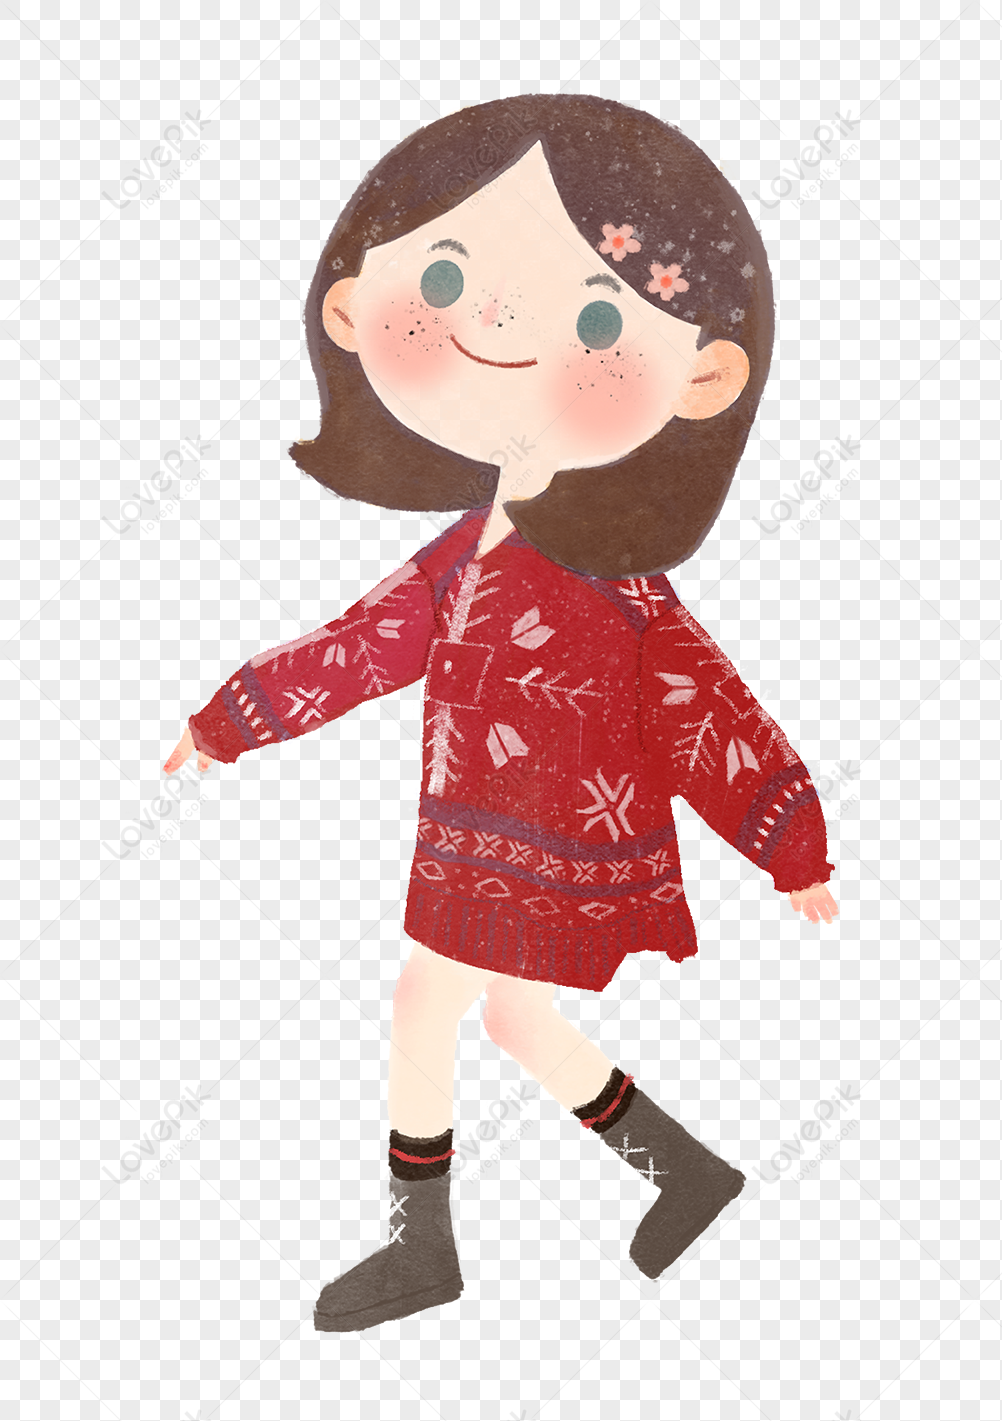 Red Sweater Girl PNG Hd Transparent Image And Clipart Image For Free  Download - Lovepik | 400336904